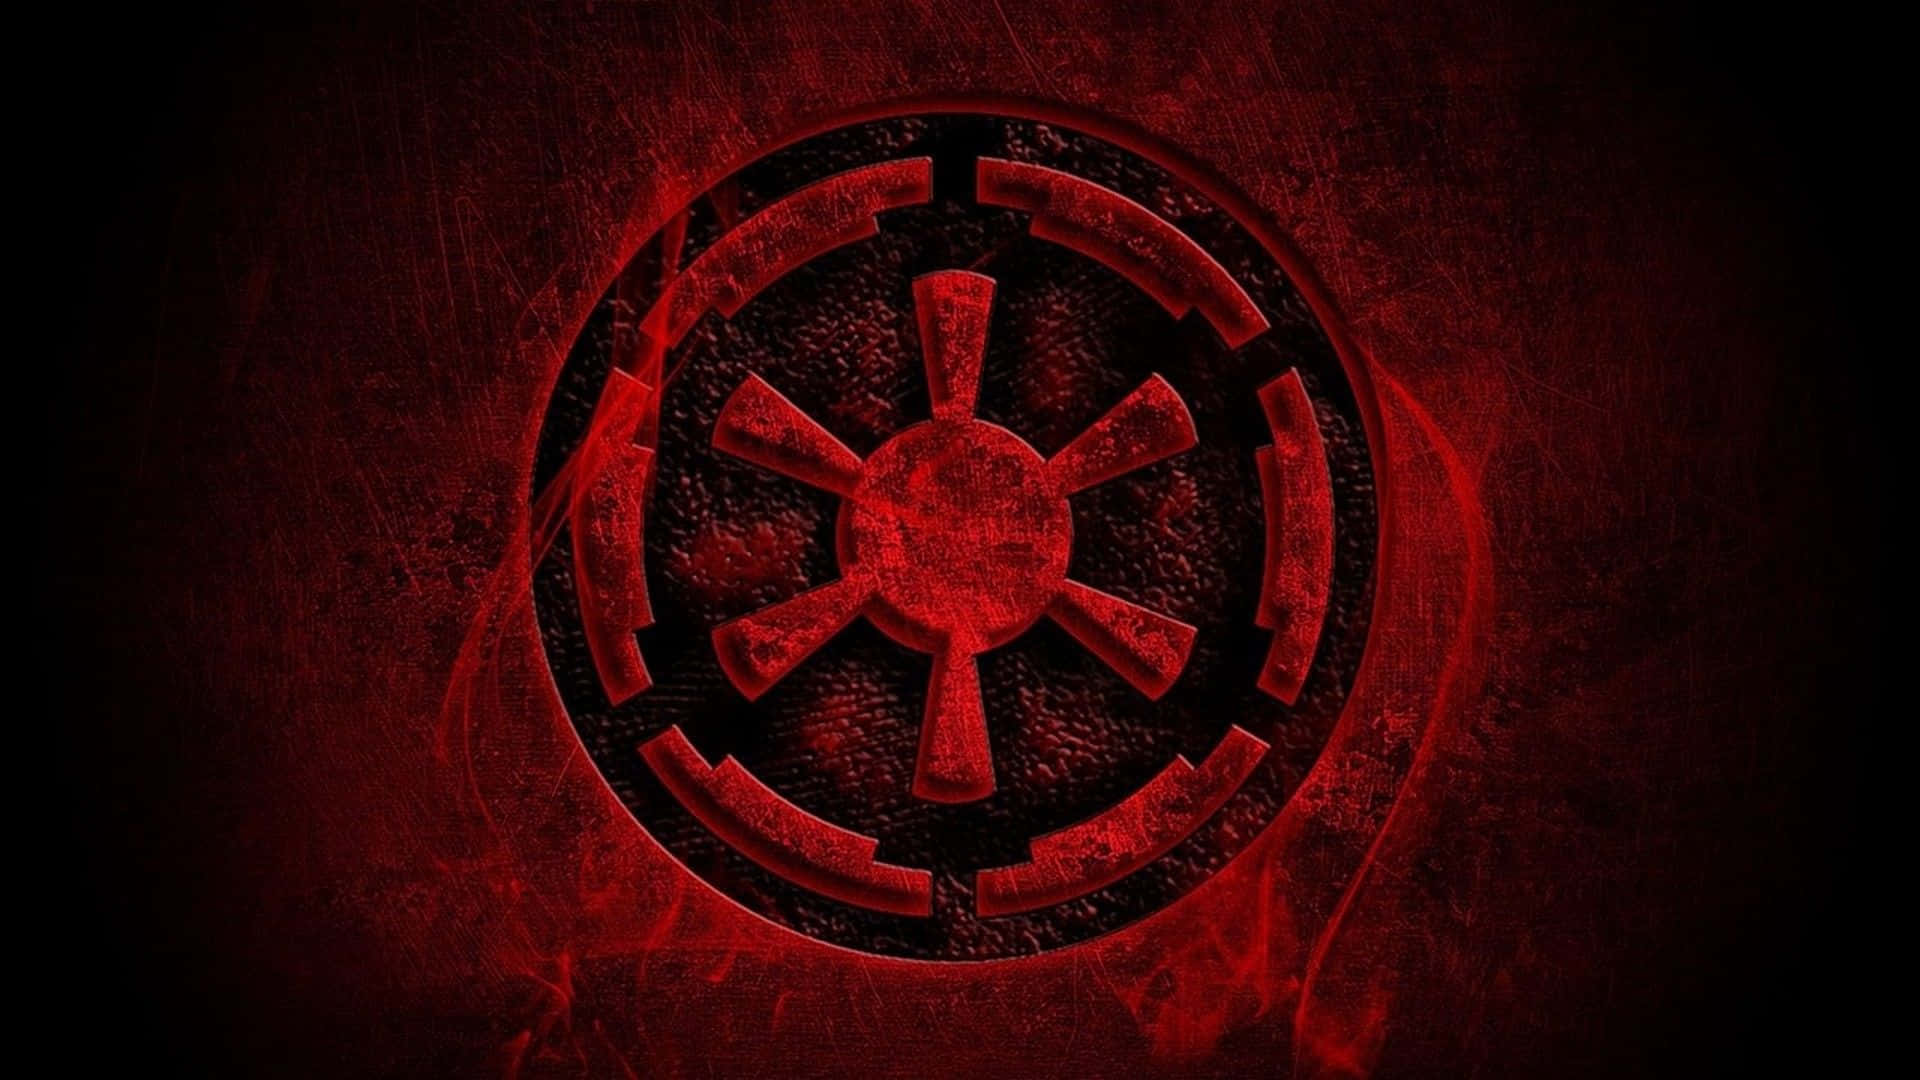 The Galactic Empire - Spreading the Influence of Darkness Across the Galaxy" Wallpaper